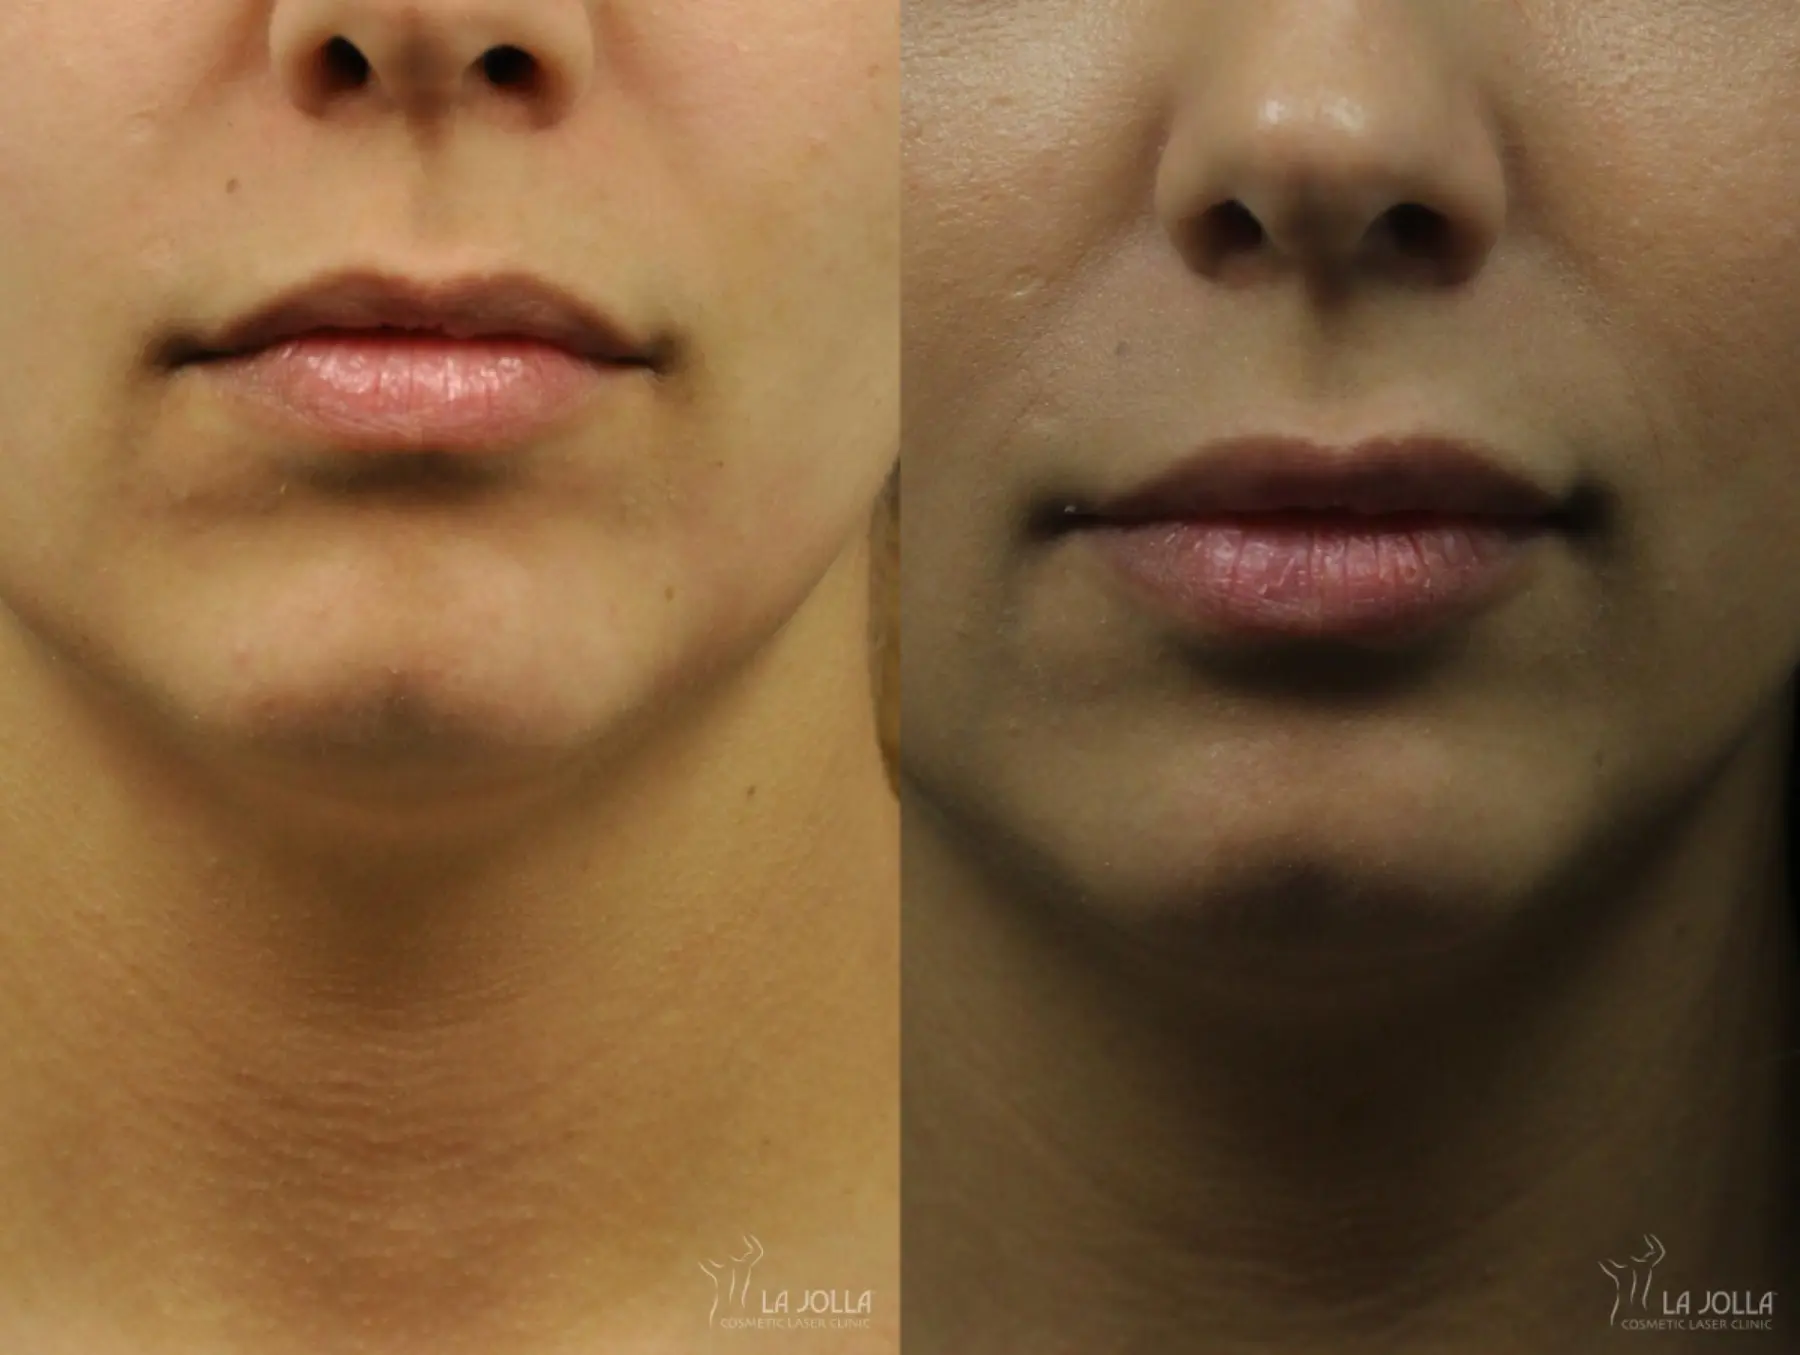 Lip Filler: Patient 9 - Before and After  